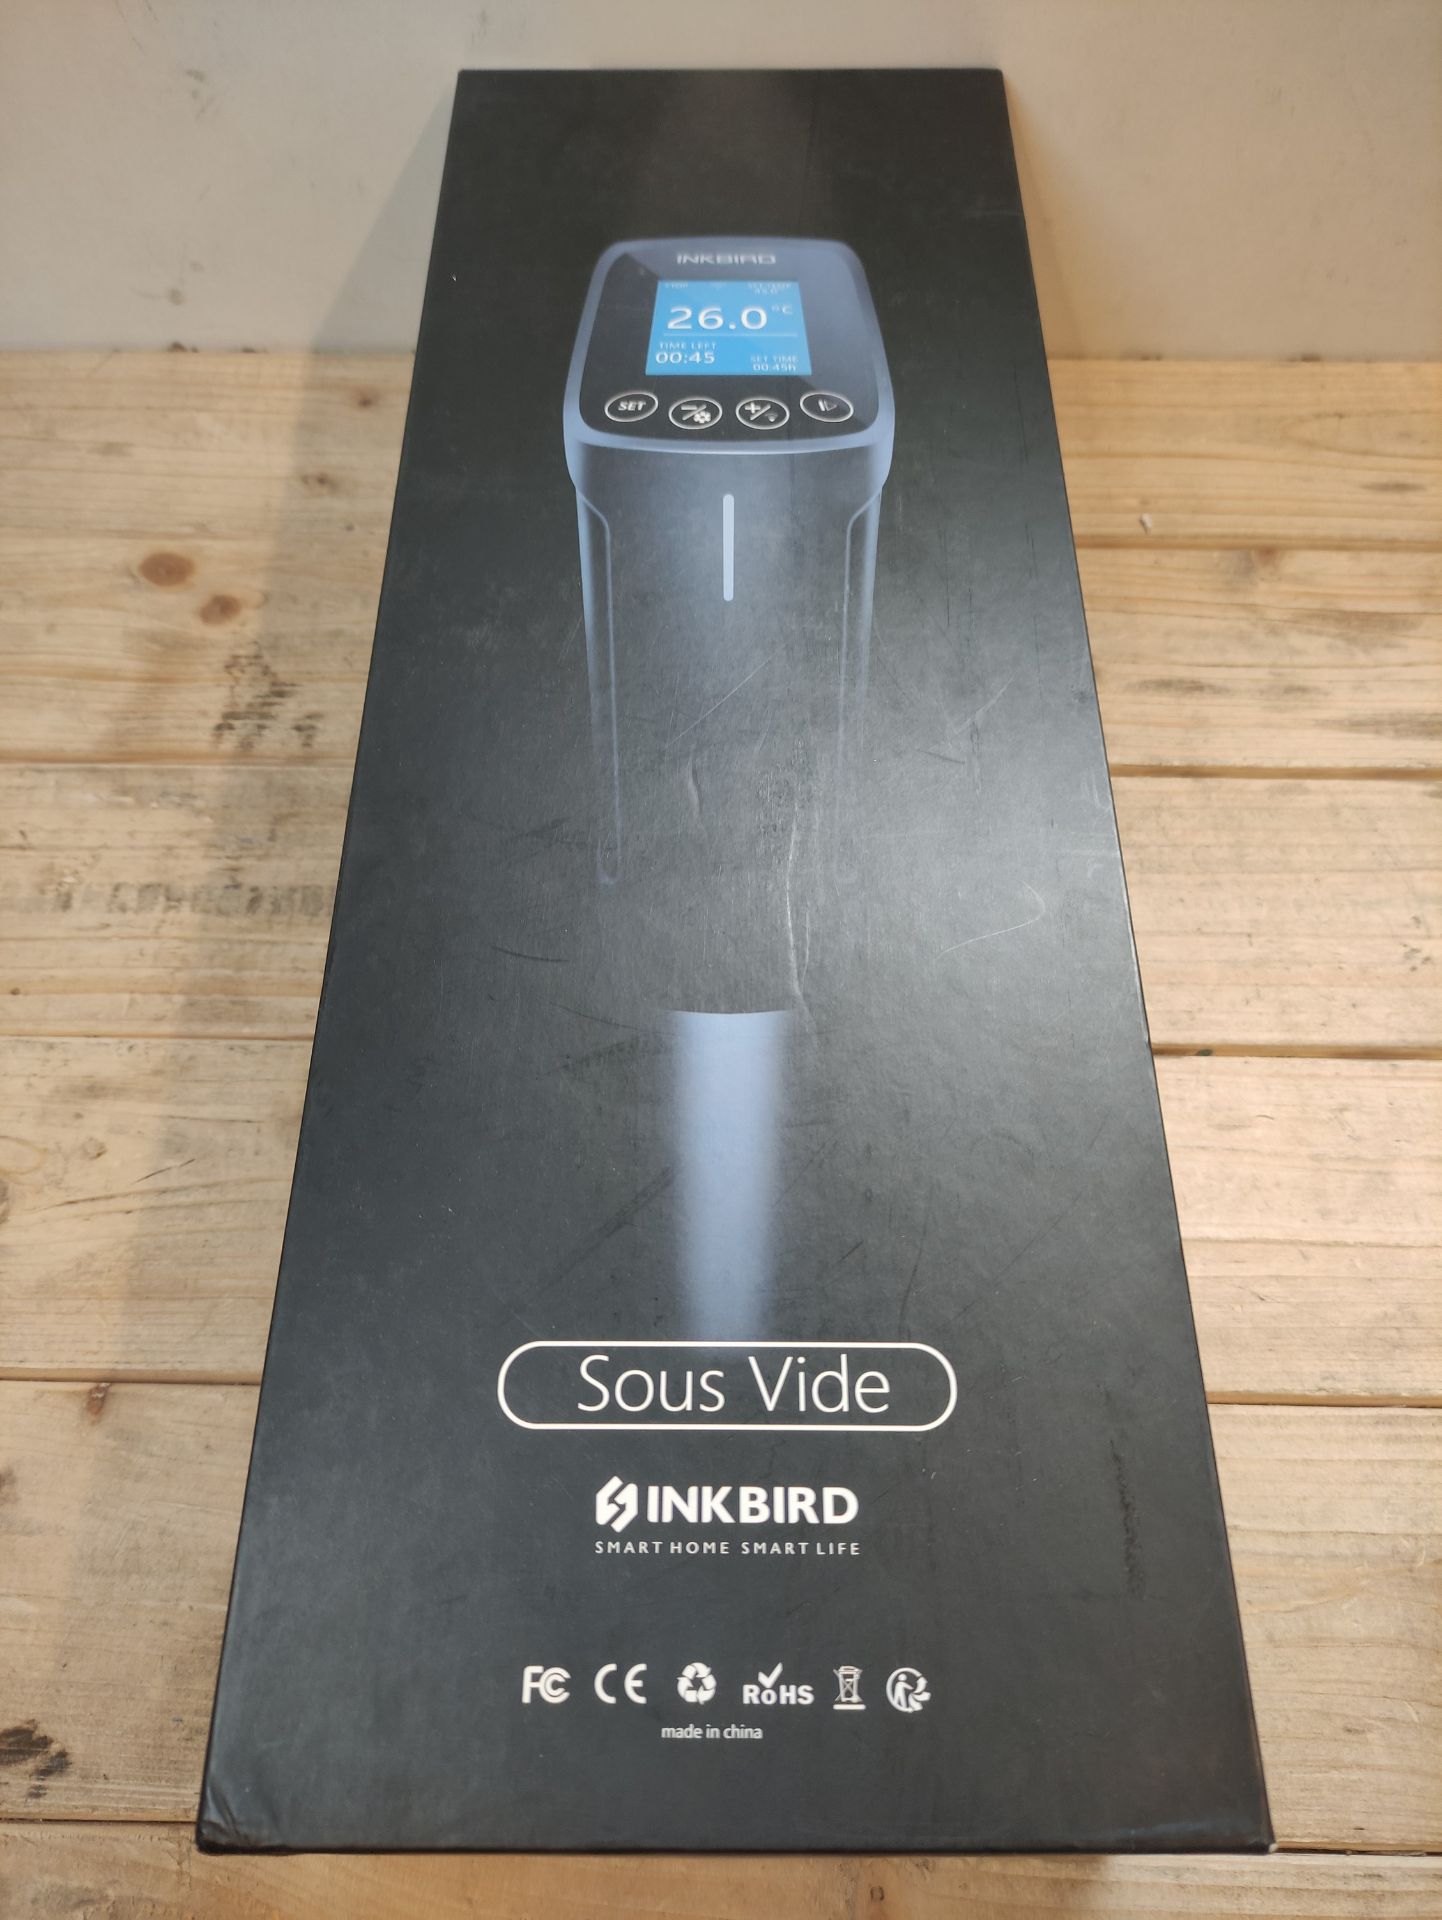 RRP £88.27 Inkbird ISV-100W Sous Vide WiFi Cooker Immersion Circulator - Image 2 of 2